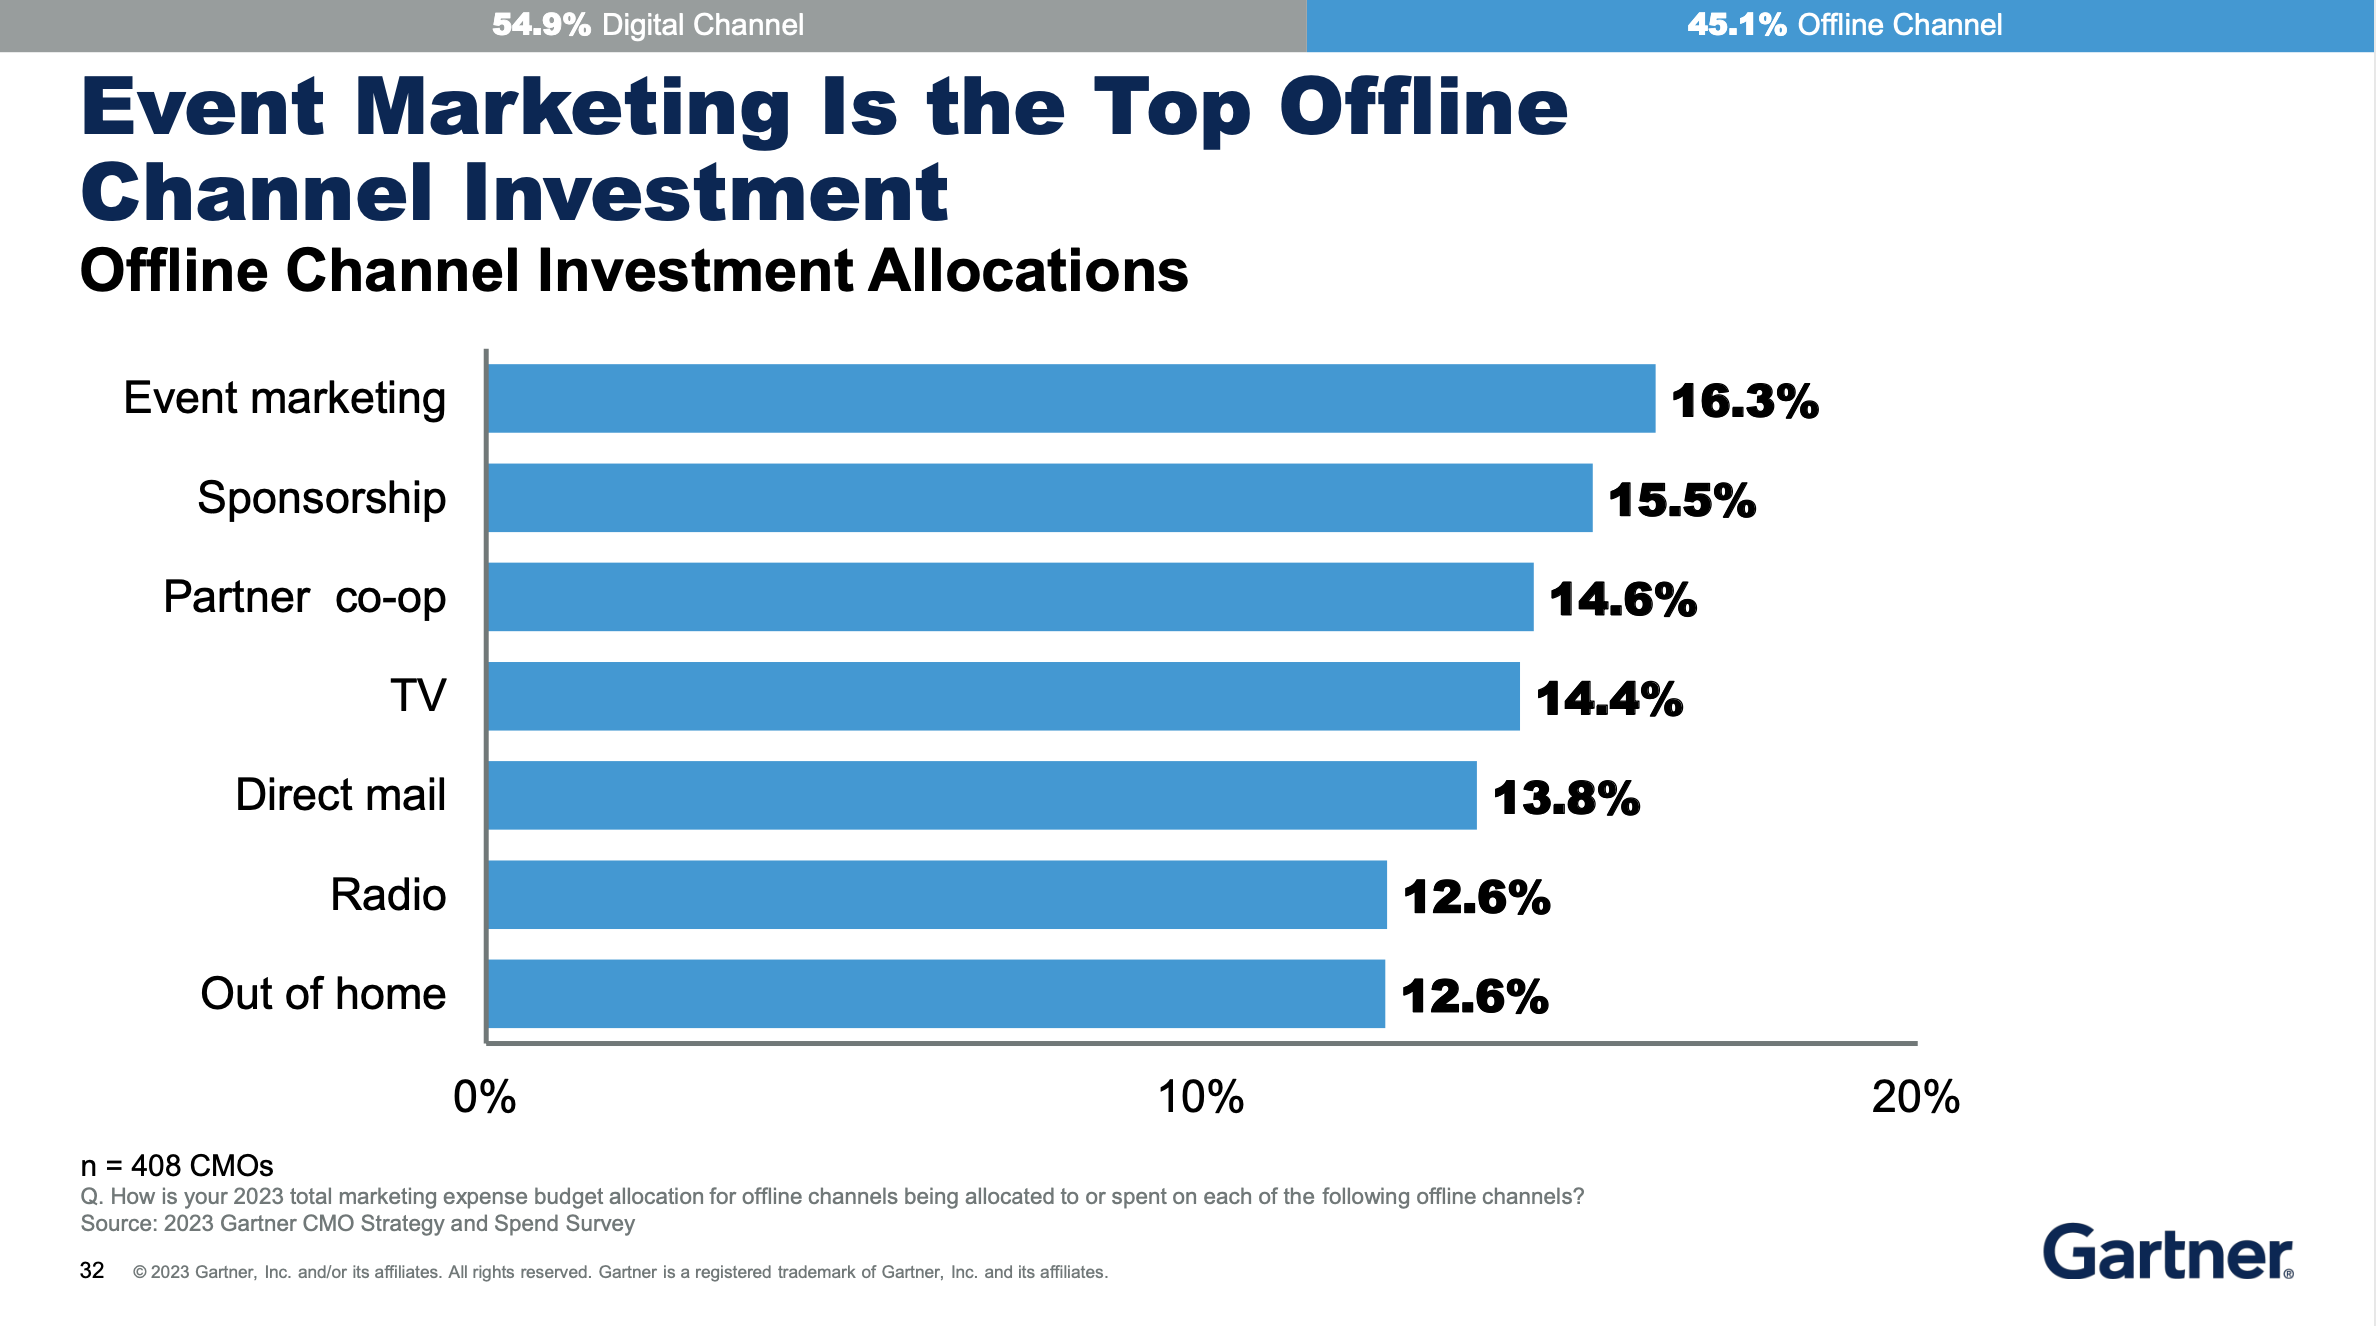 A screenshot from the 2023 Gartner CMO Strategy and Spend Survey report. It is a bar chart demonstrating offline investment allocations.